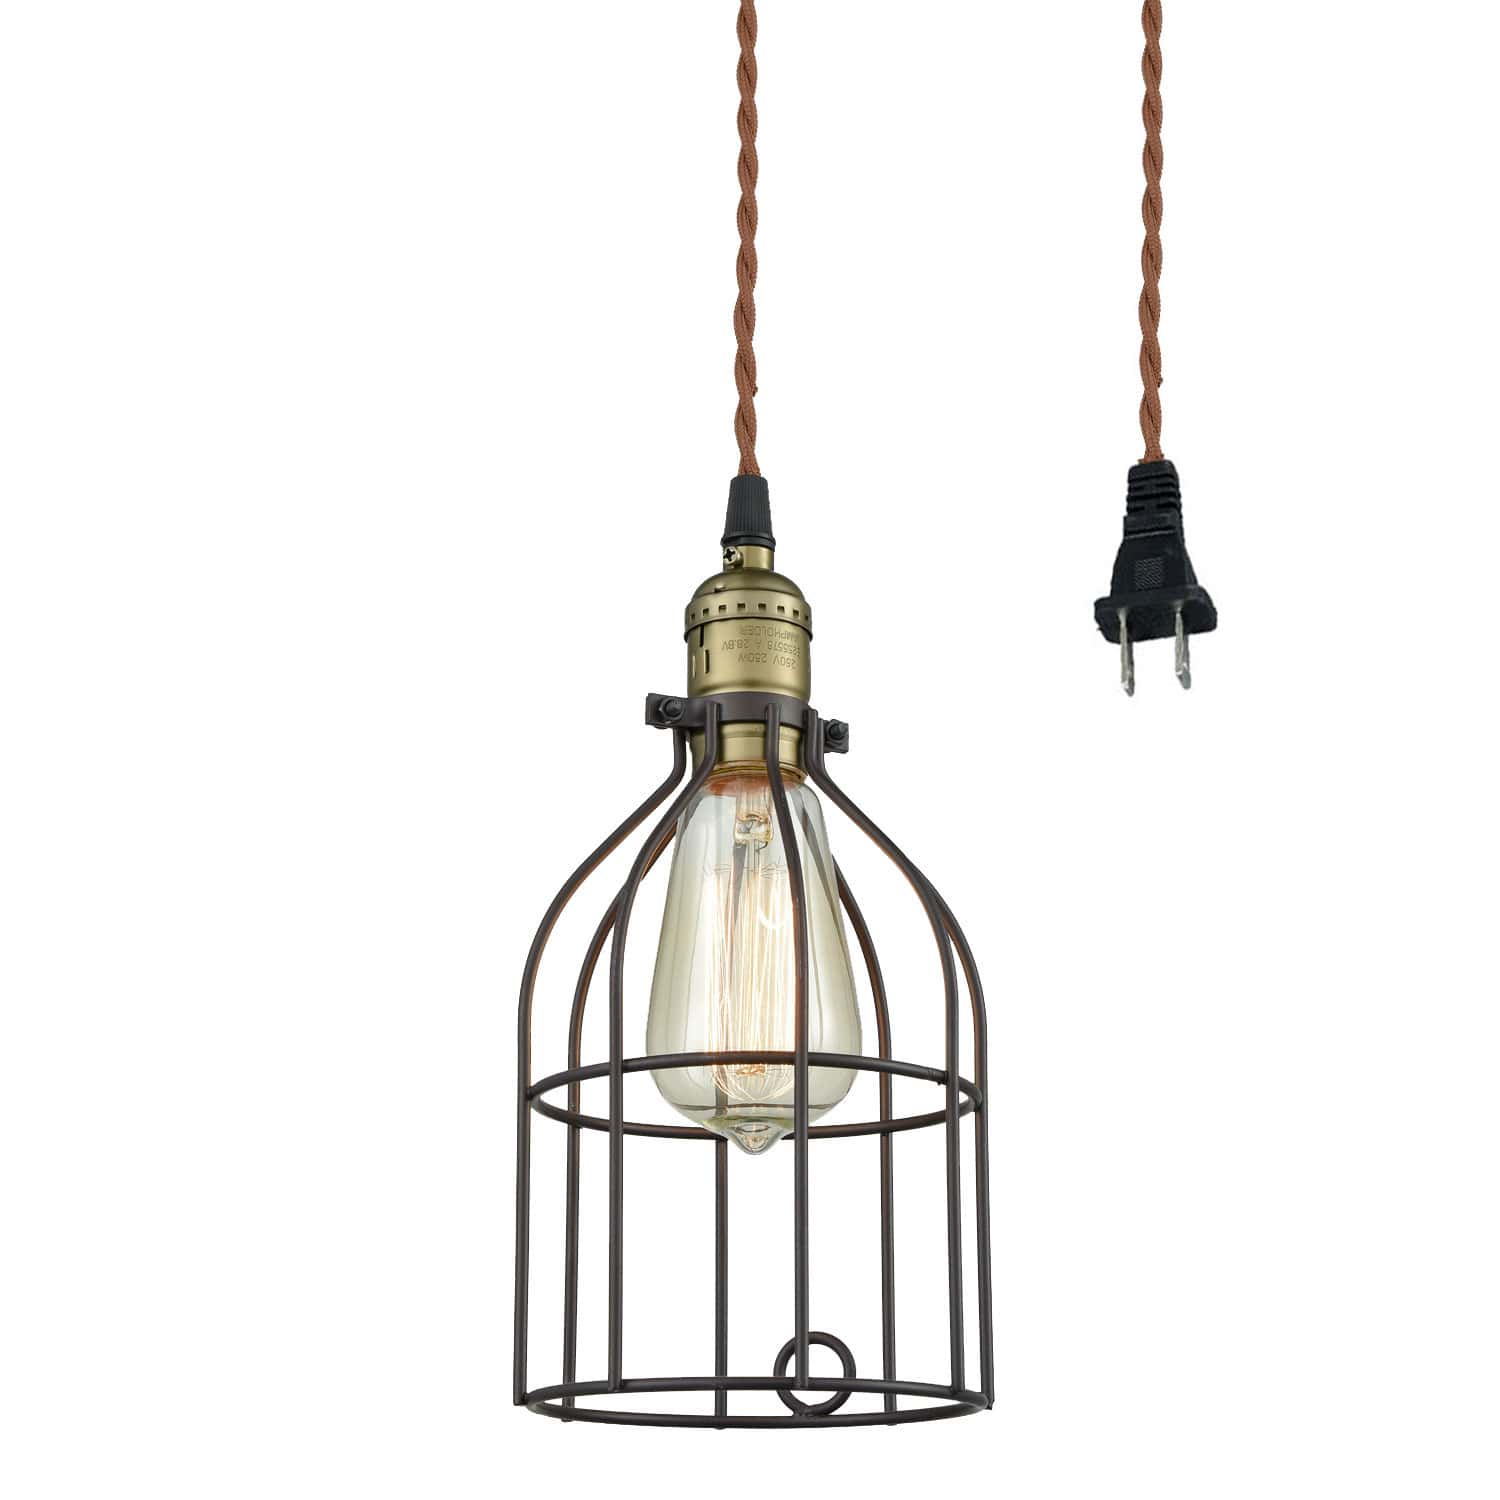 Industrial Plug-In Pendant Light Bronze Finish with Bird Cage Shade